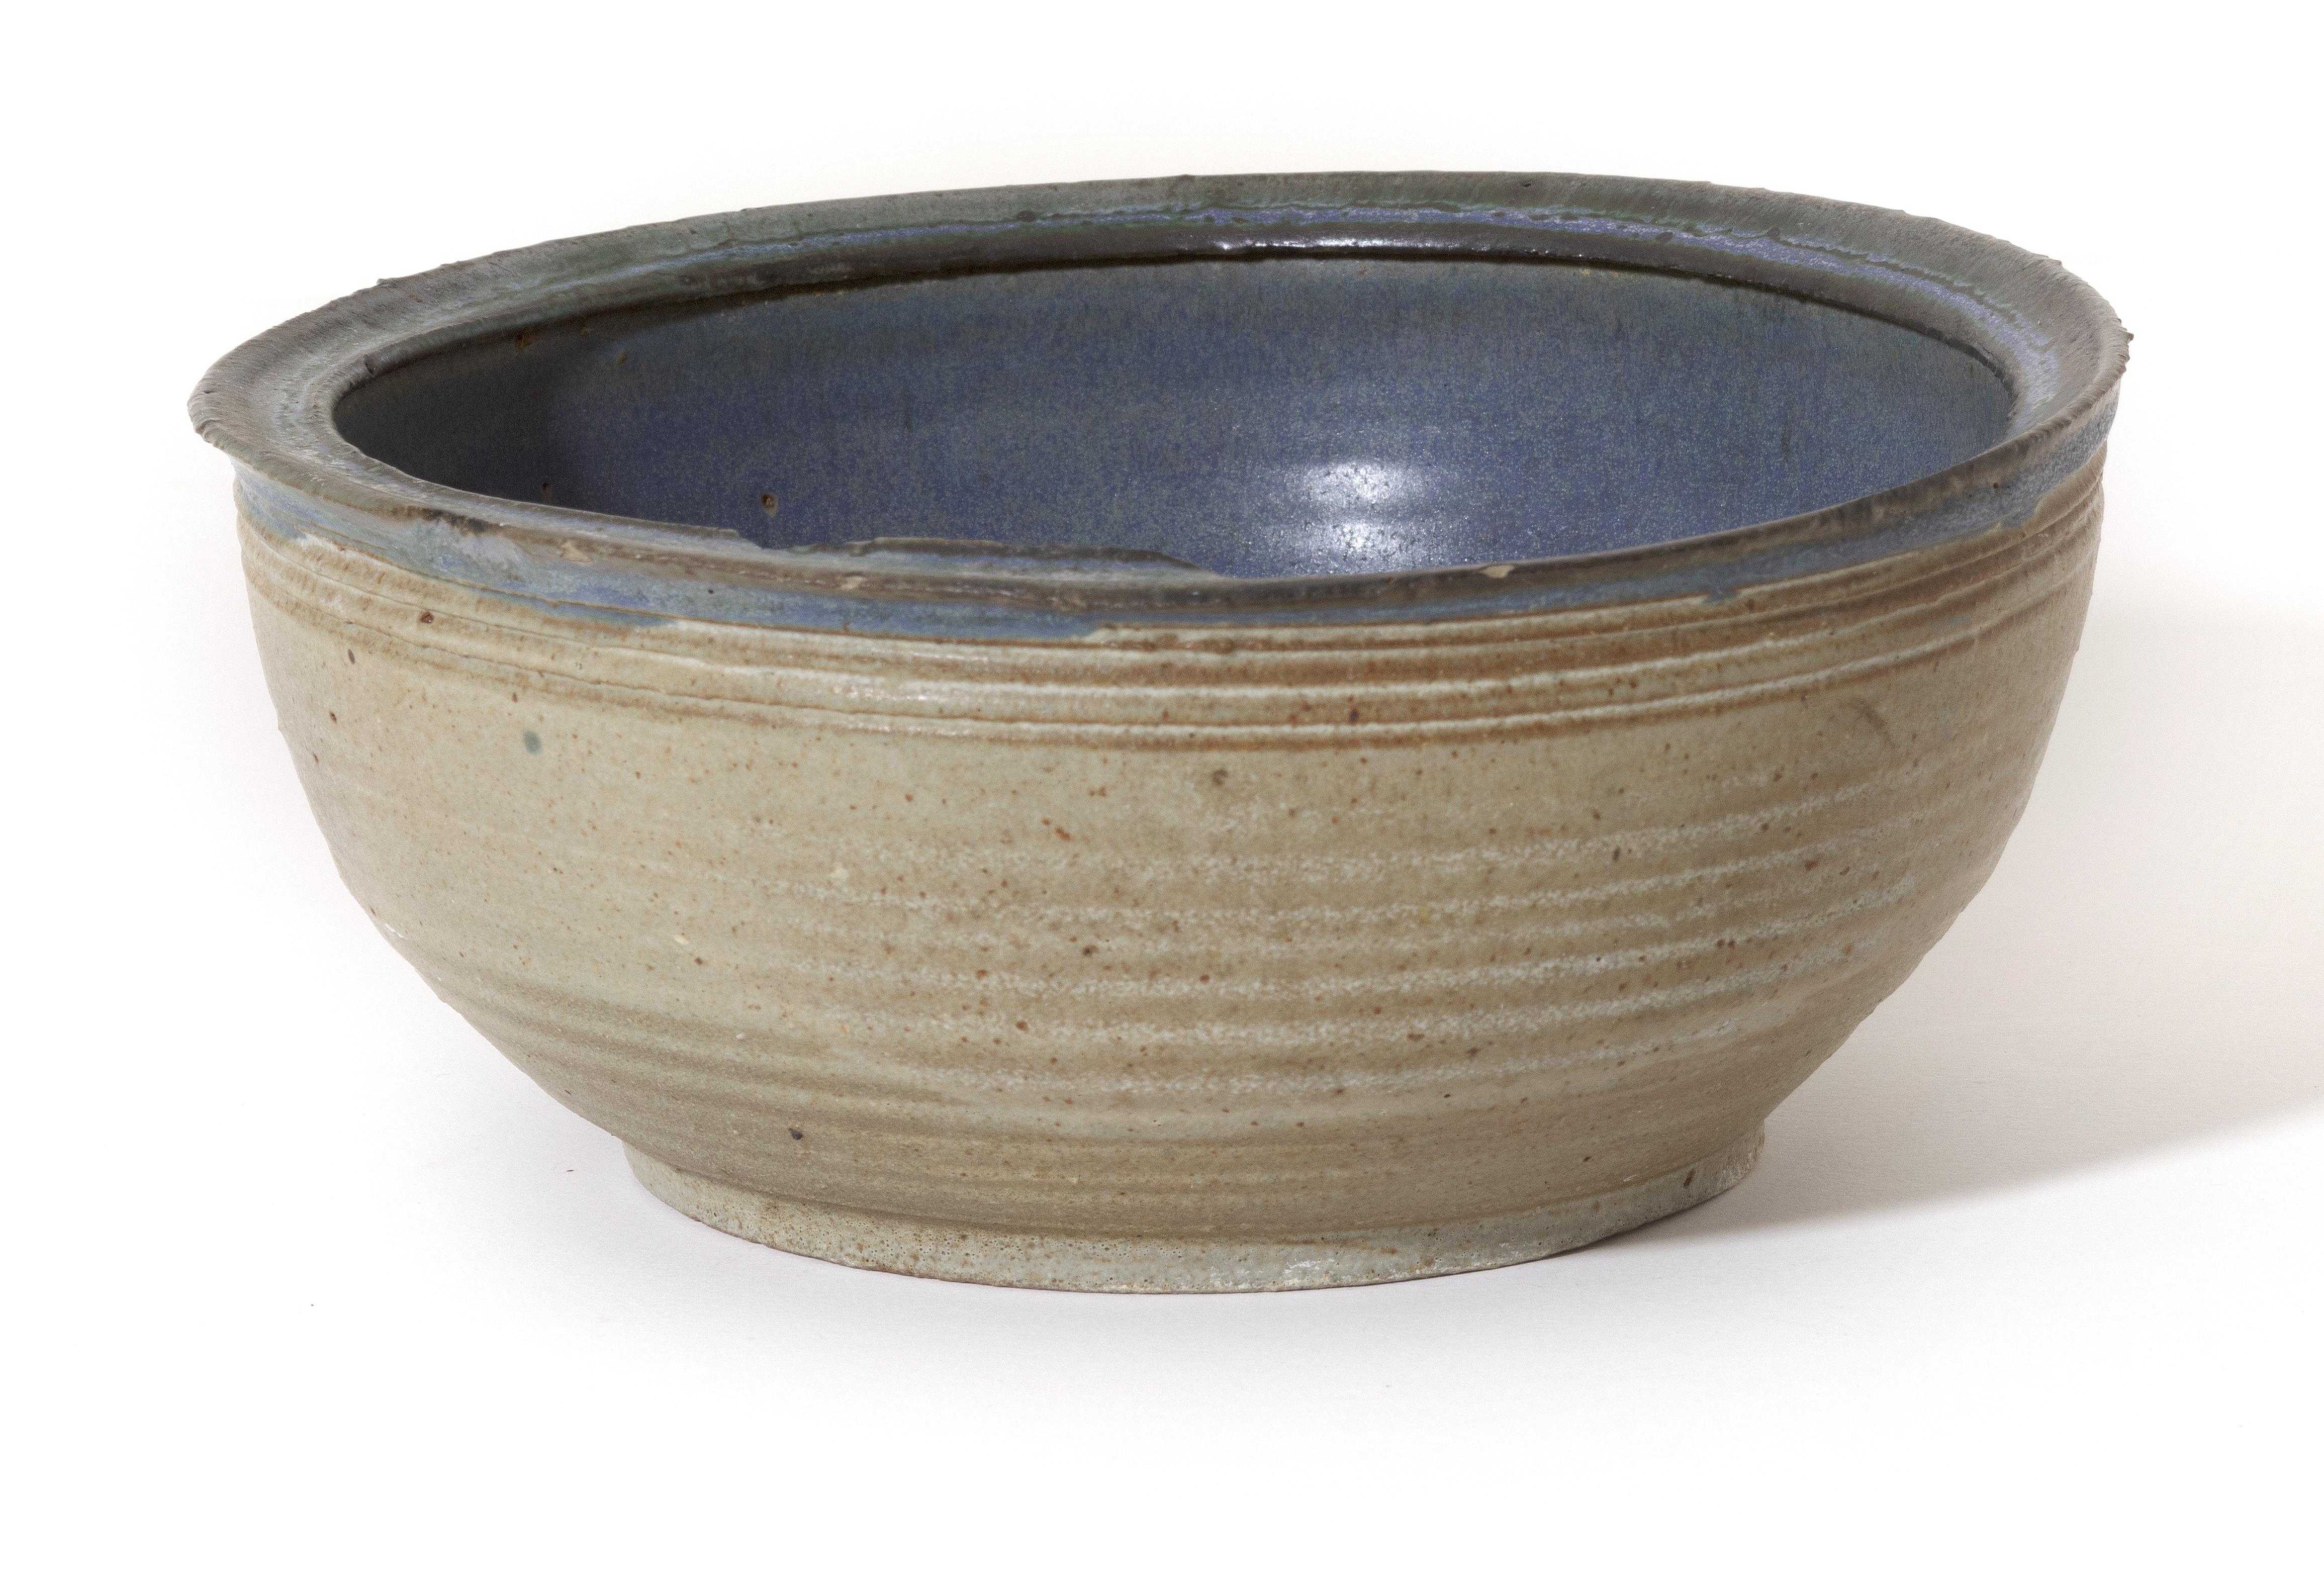 'Bowl (Blue & White)' is a hand-thrown glazed stoneware bowl made by Mark Shekore, signed with his last name on the bottom of the piece.

3.75 x 8.75 in

Mark Shekore attended the University of Wisconsin - Milwaukee, where he received his B.S.,